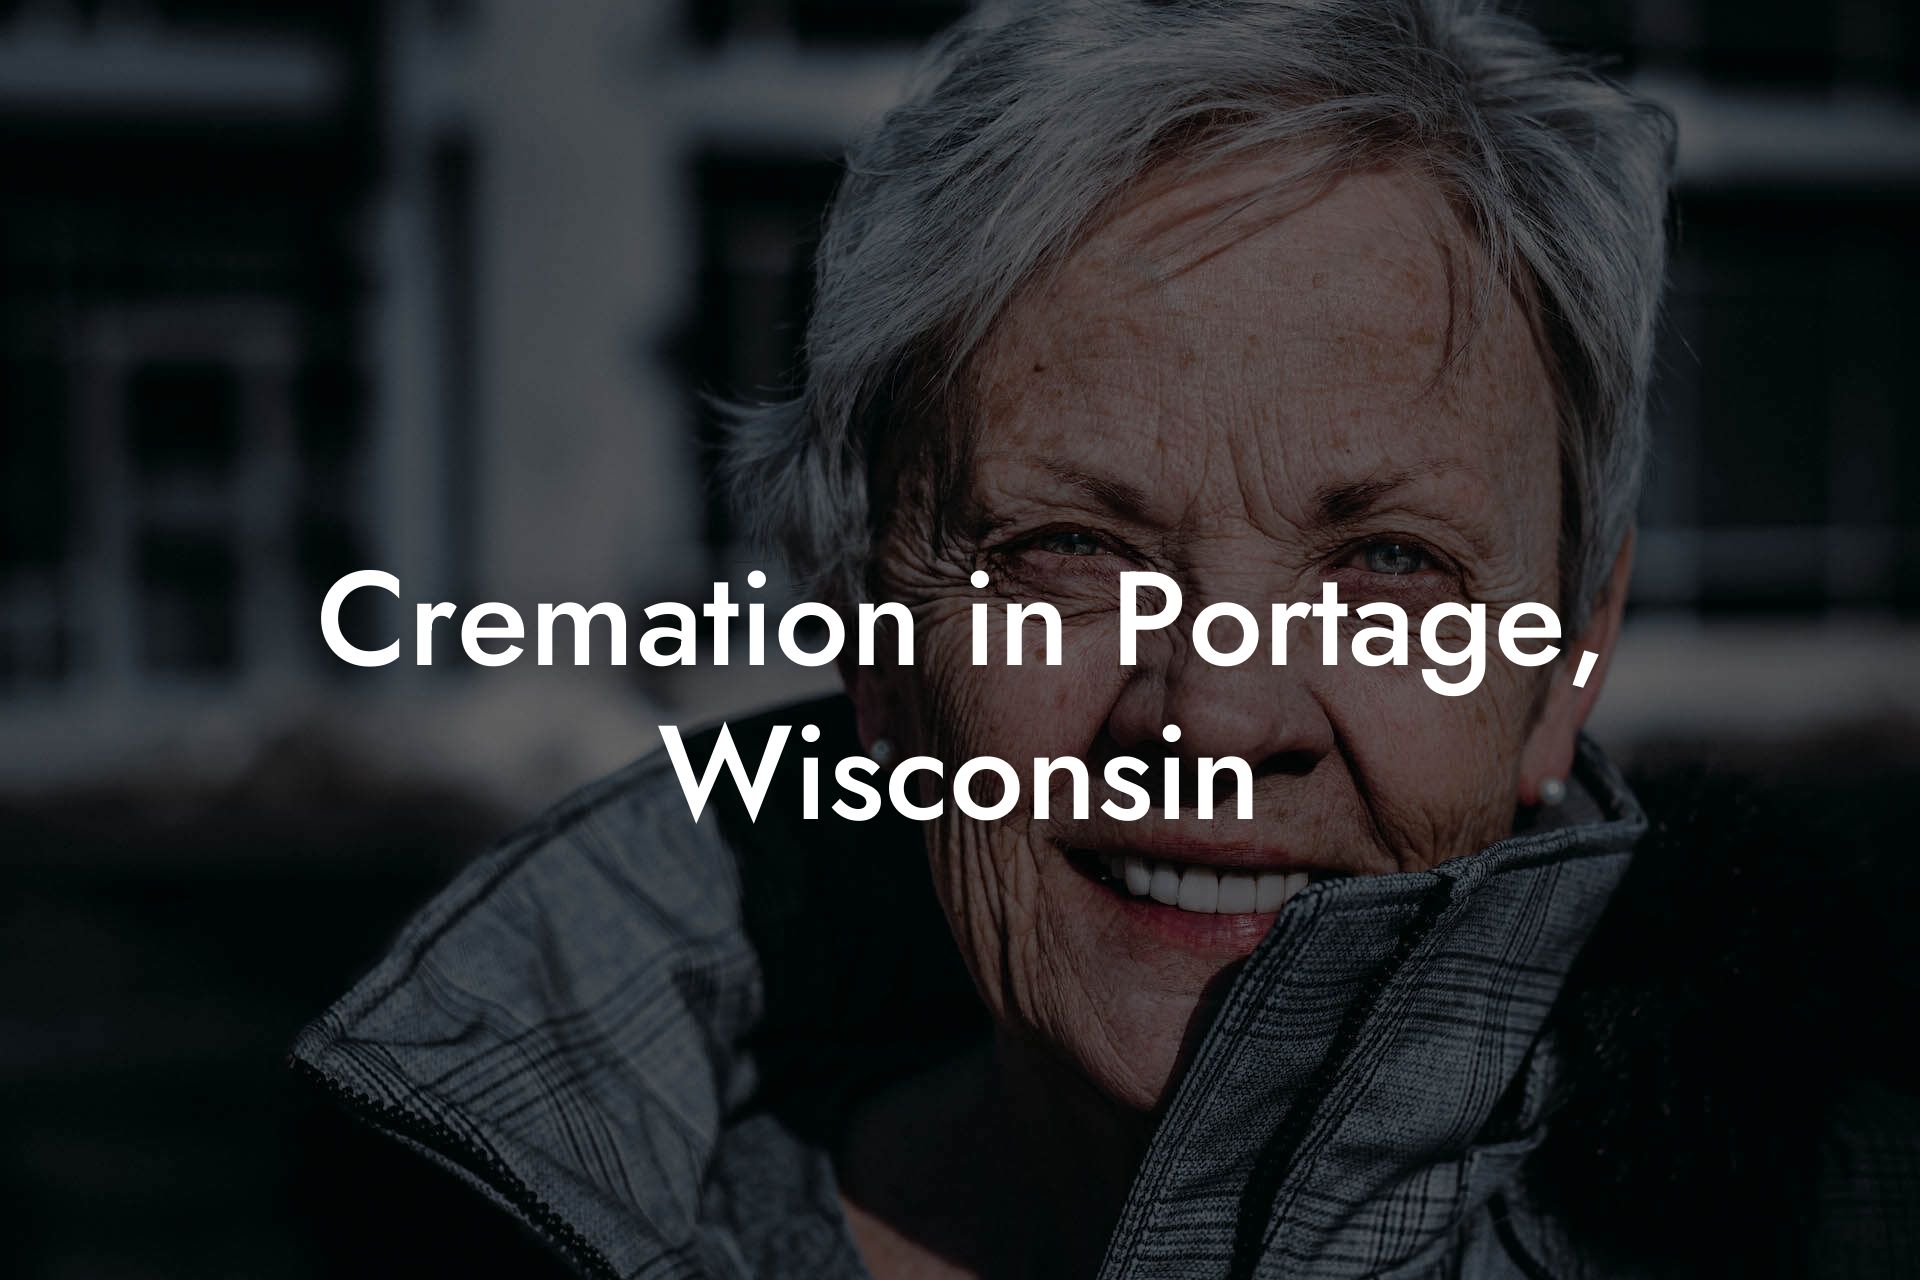 Cremation in Portage, Wisconsin